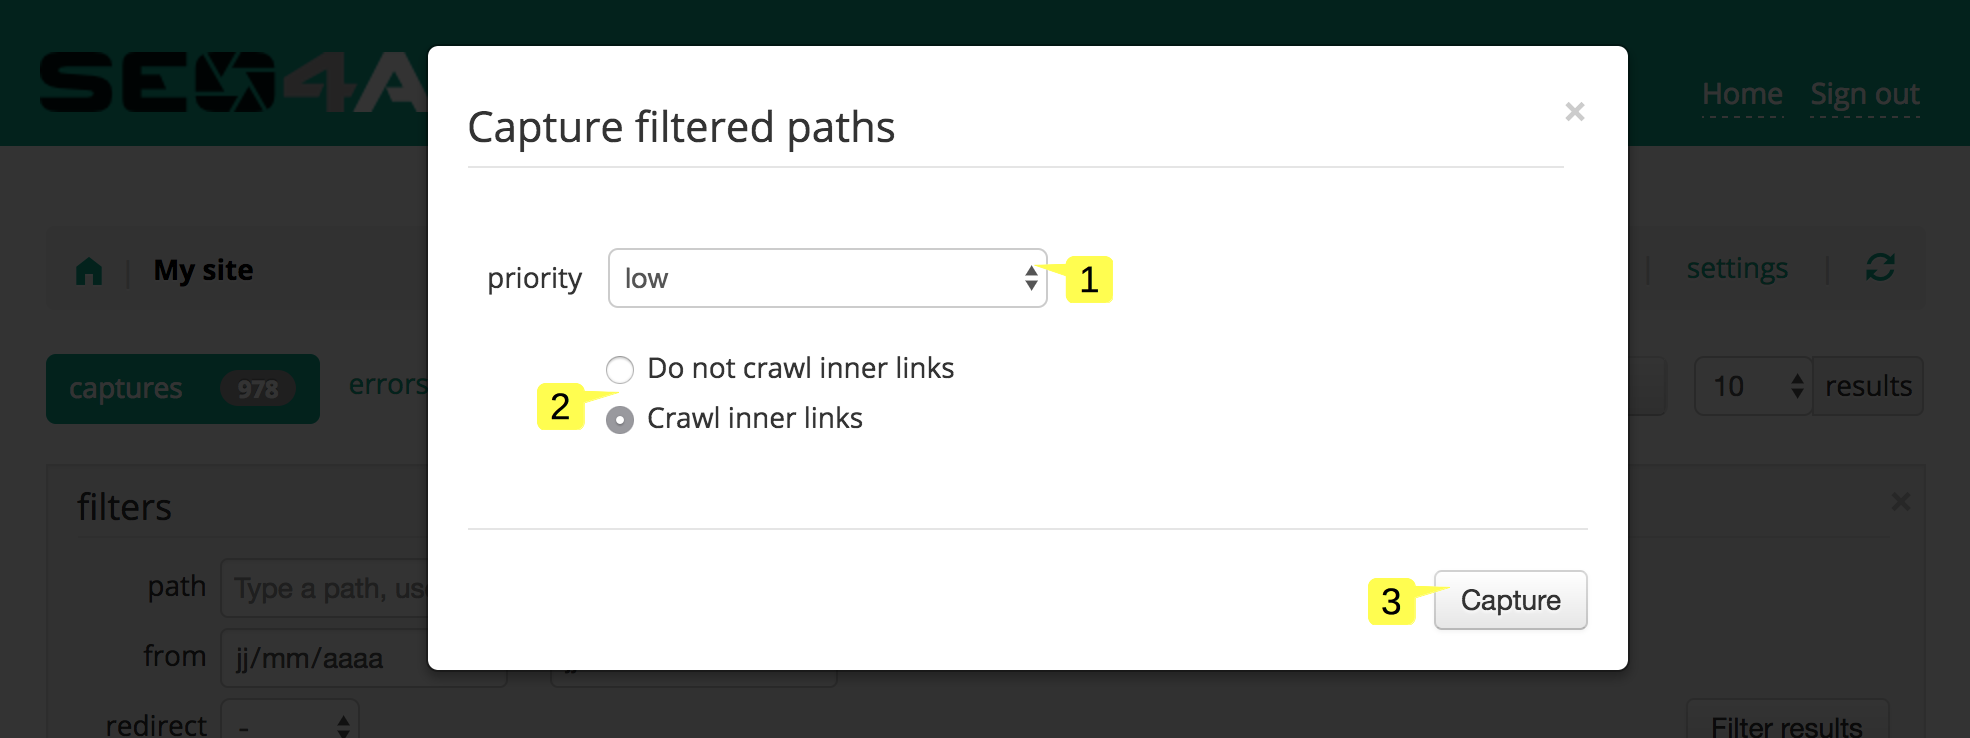 screenshot of the Capture all filtered paths popup in the Site status page